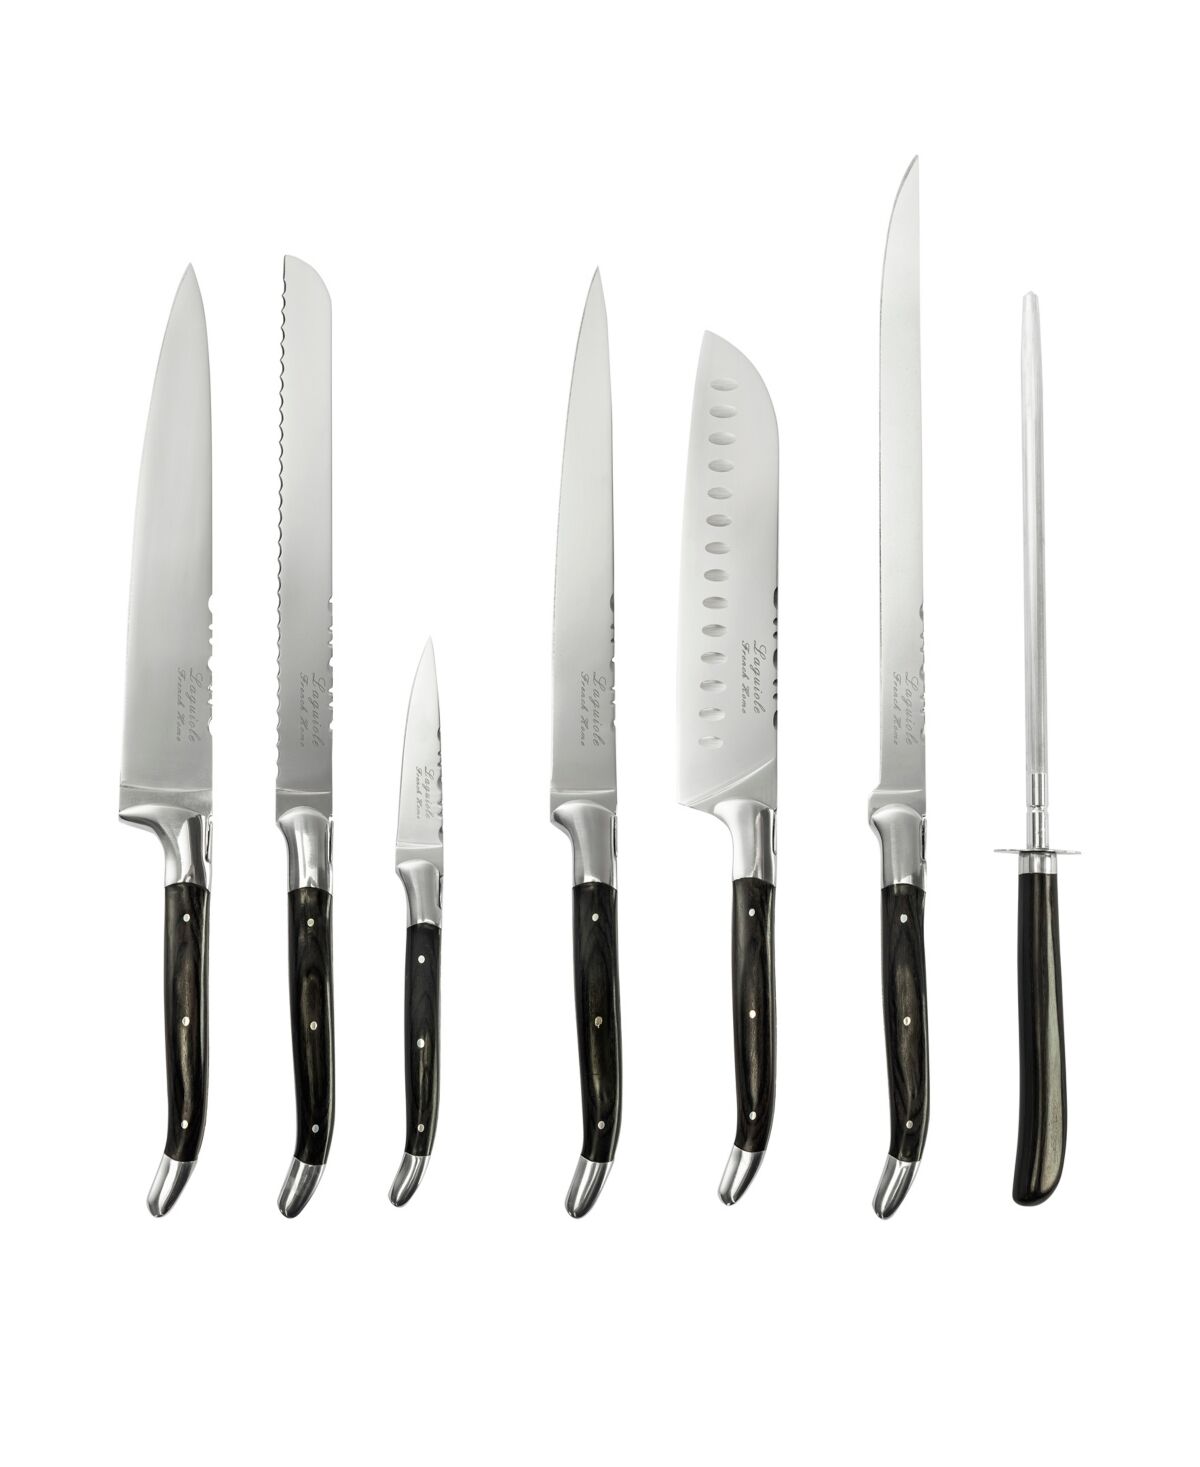 French Home Connoisseur Laguiole Kitchen Knife with Knife Sharpener, Set of 7 - Black